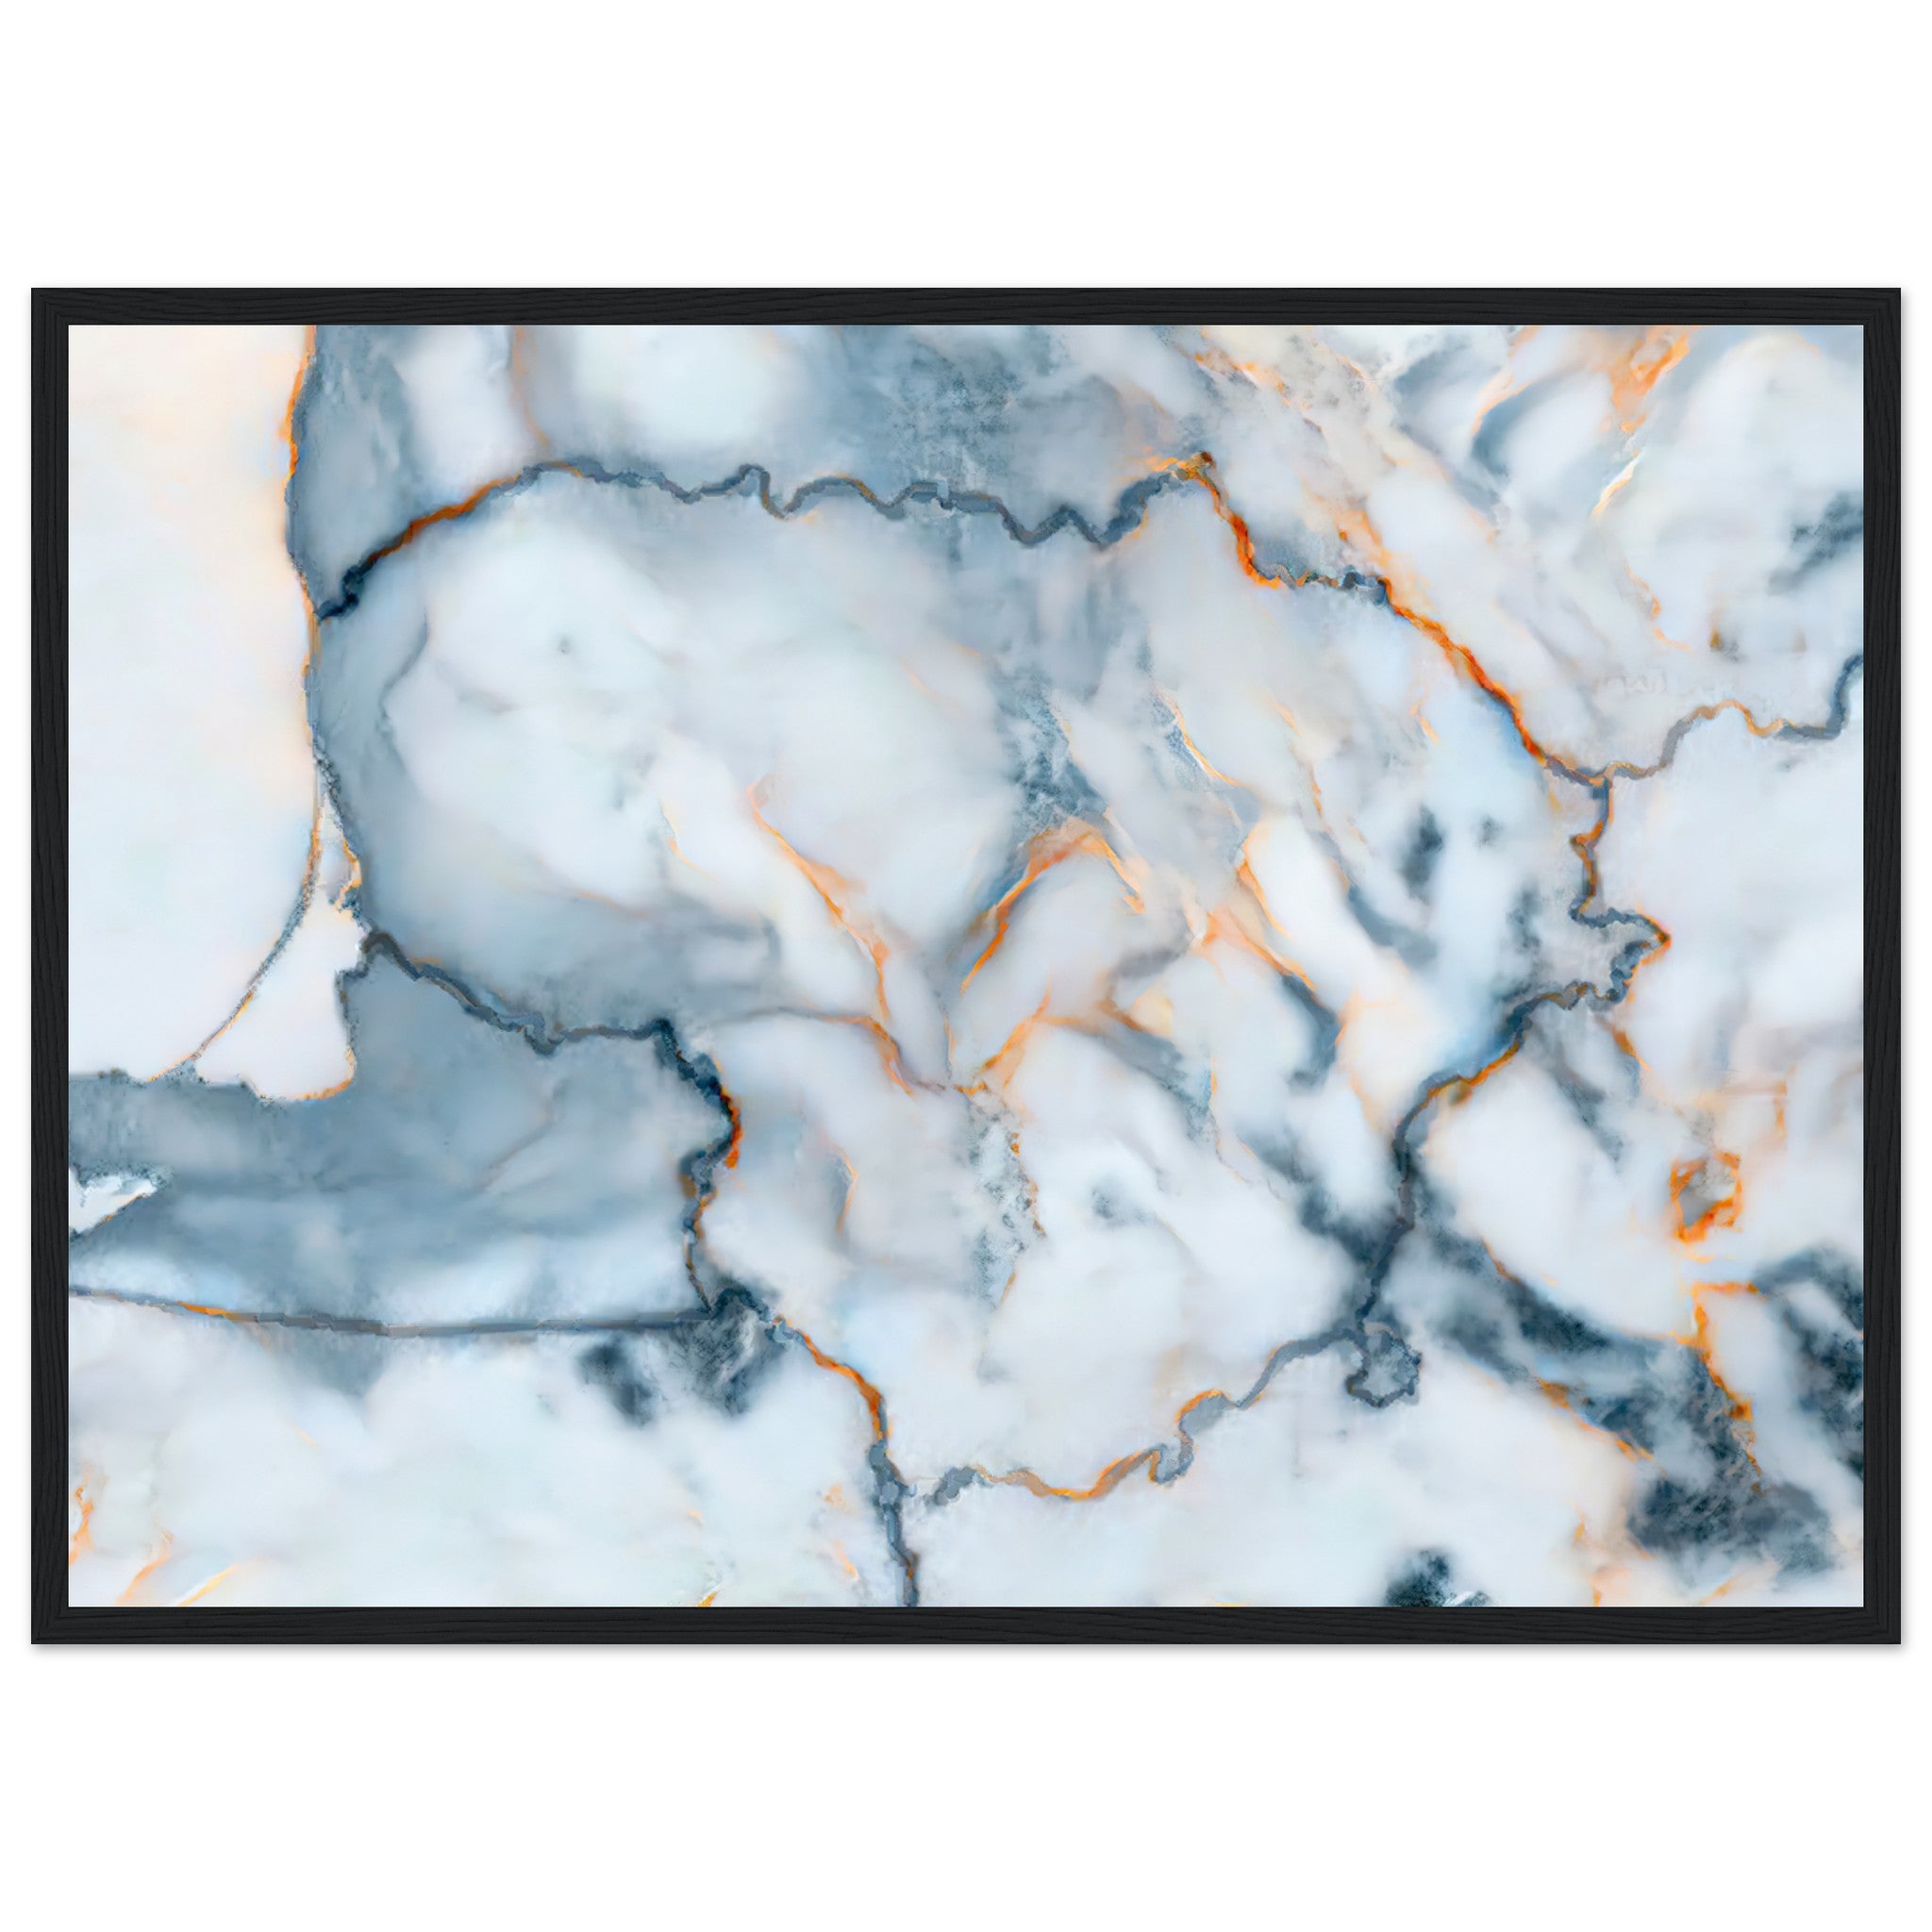 Lithuania Marble Map Poster